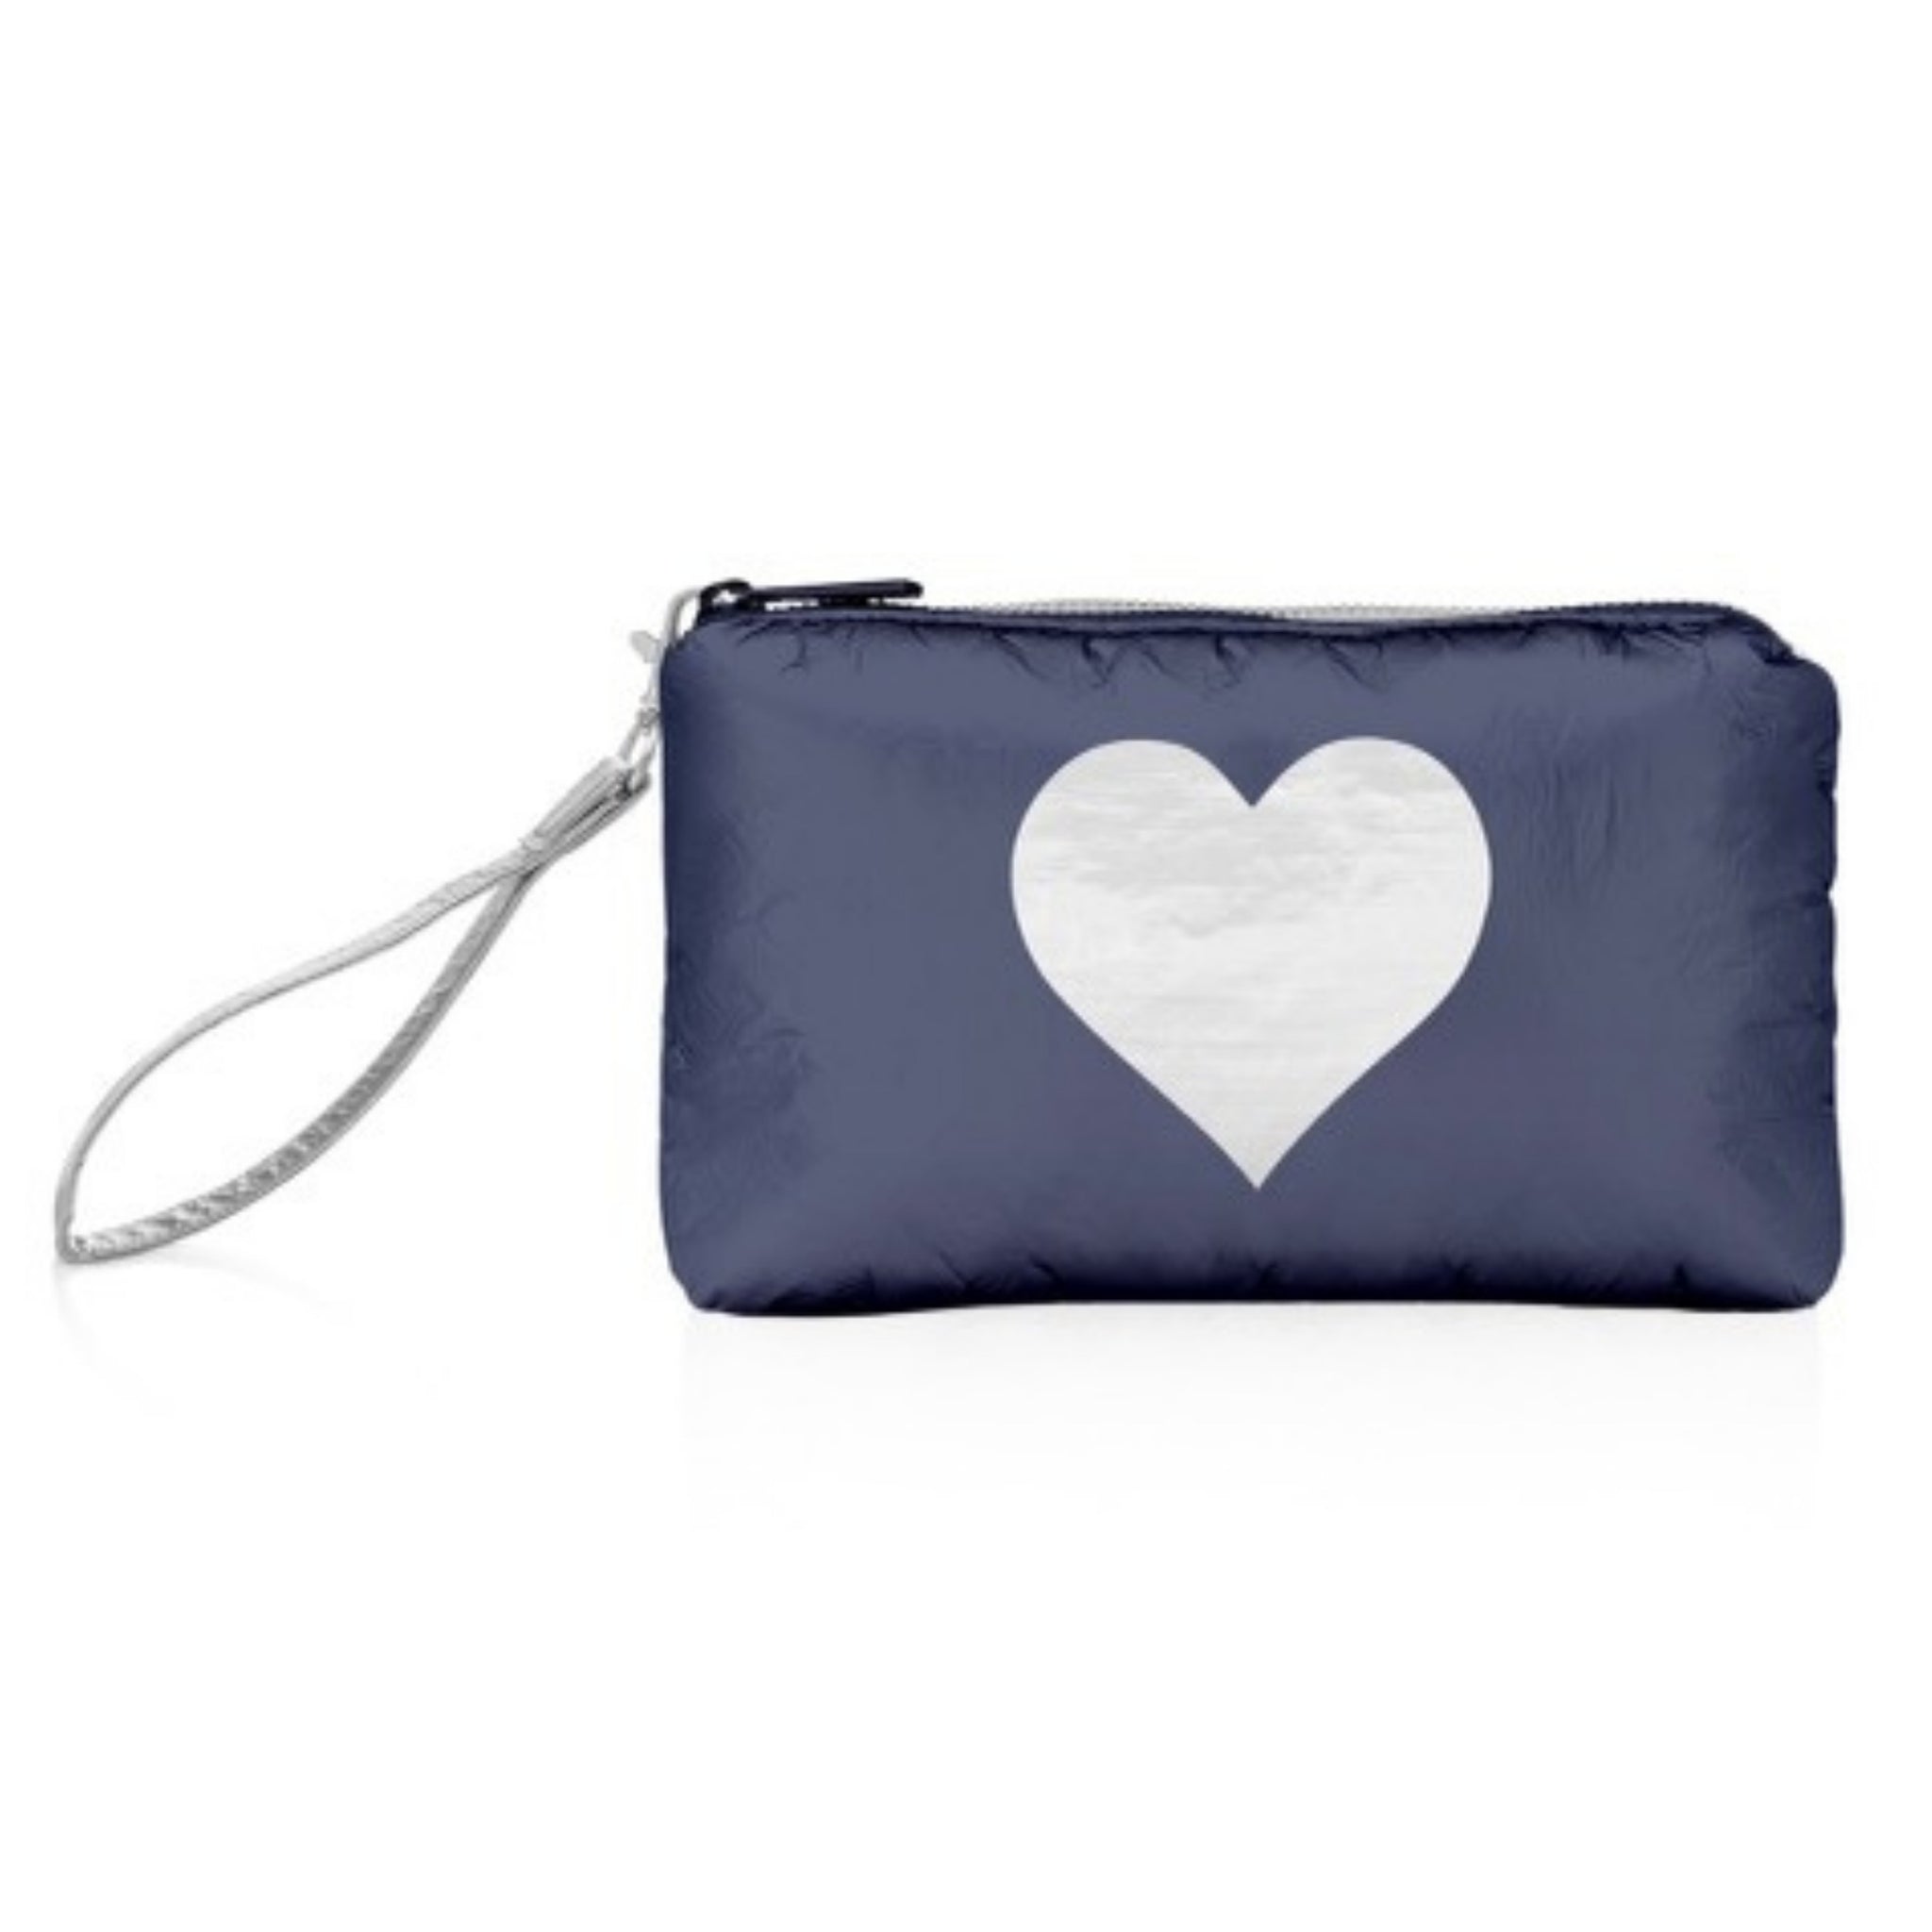 Zip Wristlet in Shimmer Navy with Silver Heart